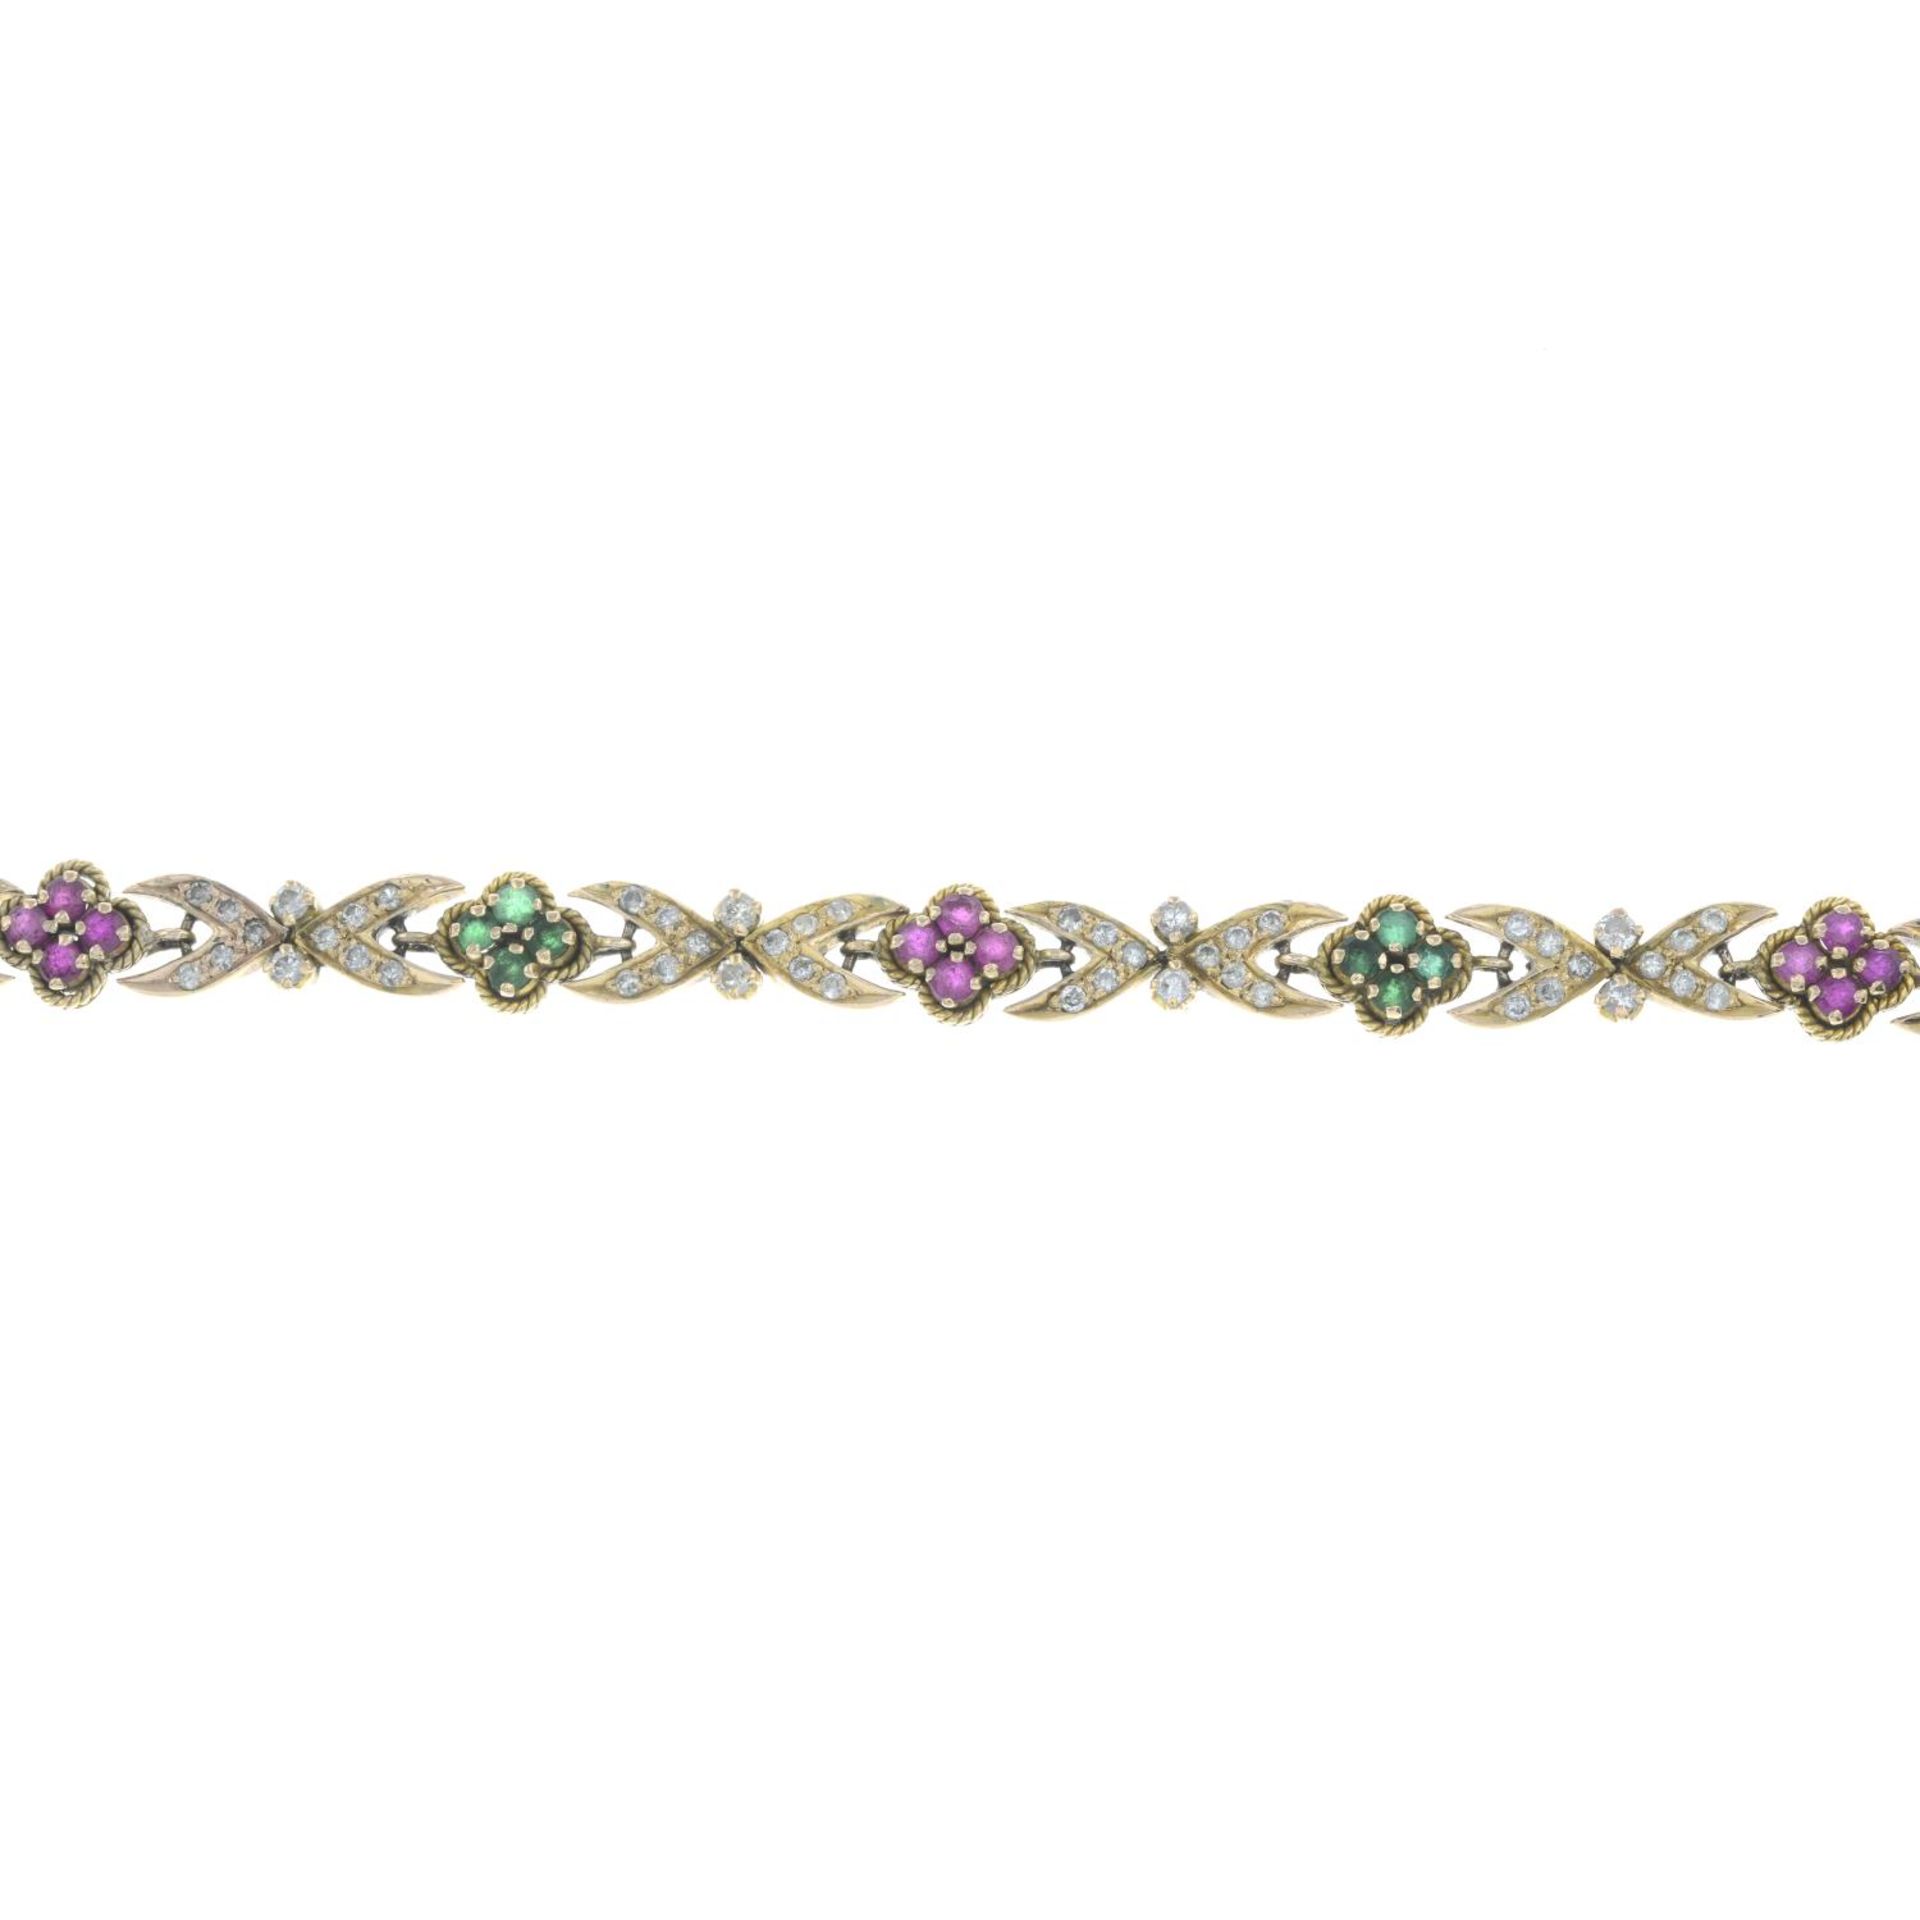 A brilliant-cut diamond and gem-set bracelet.Gems include emerald and synthetic ruby.Estimated